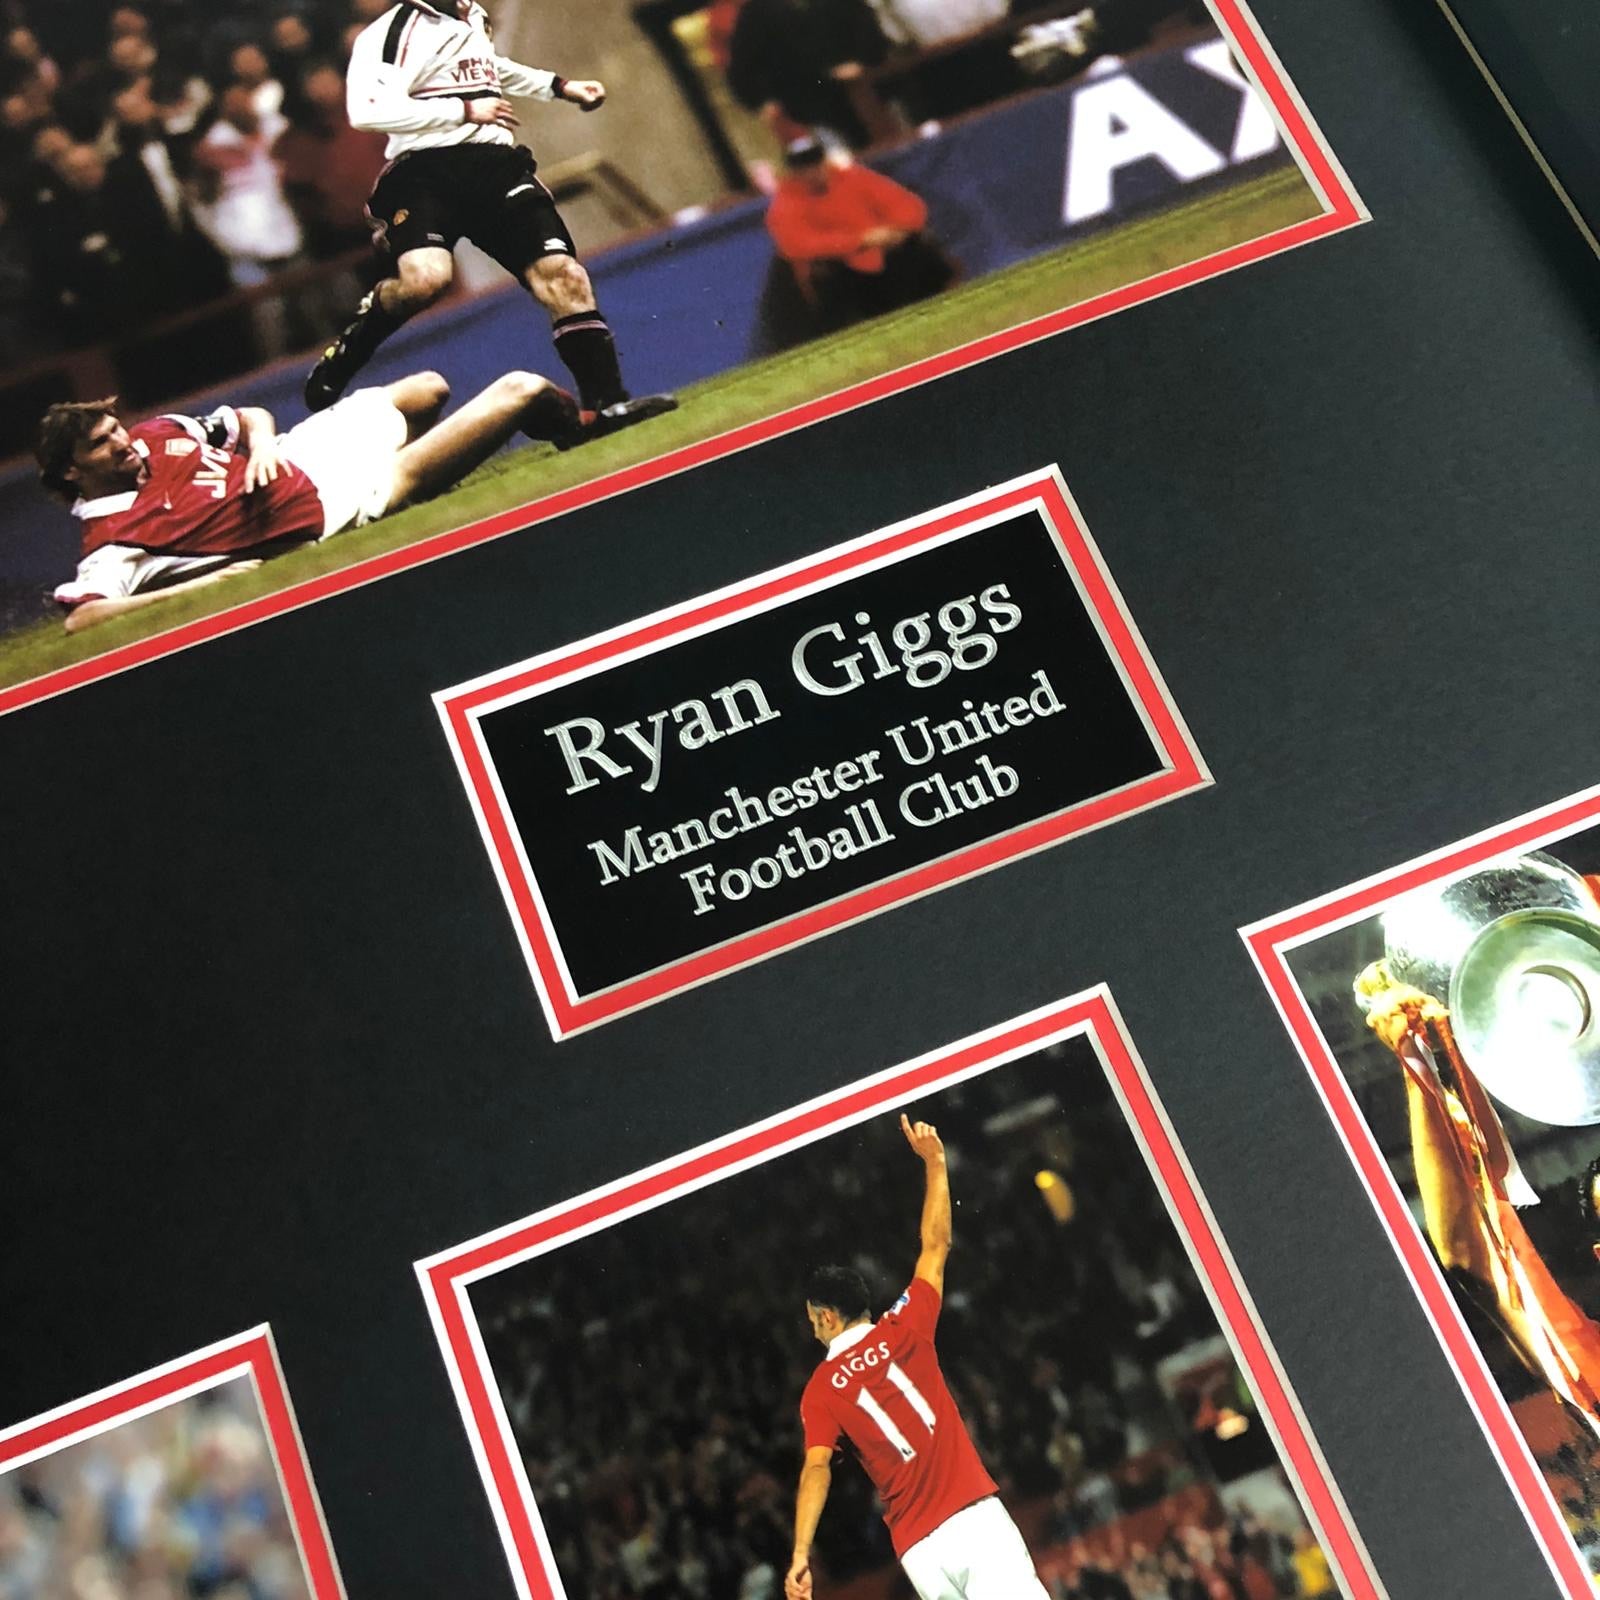 Ryan Giggs - Manchester United Legend - Signed Frame with COA